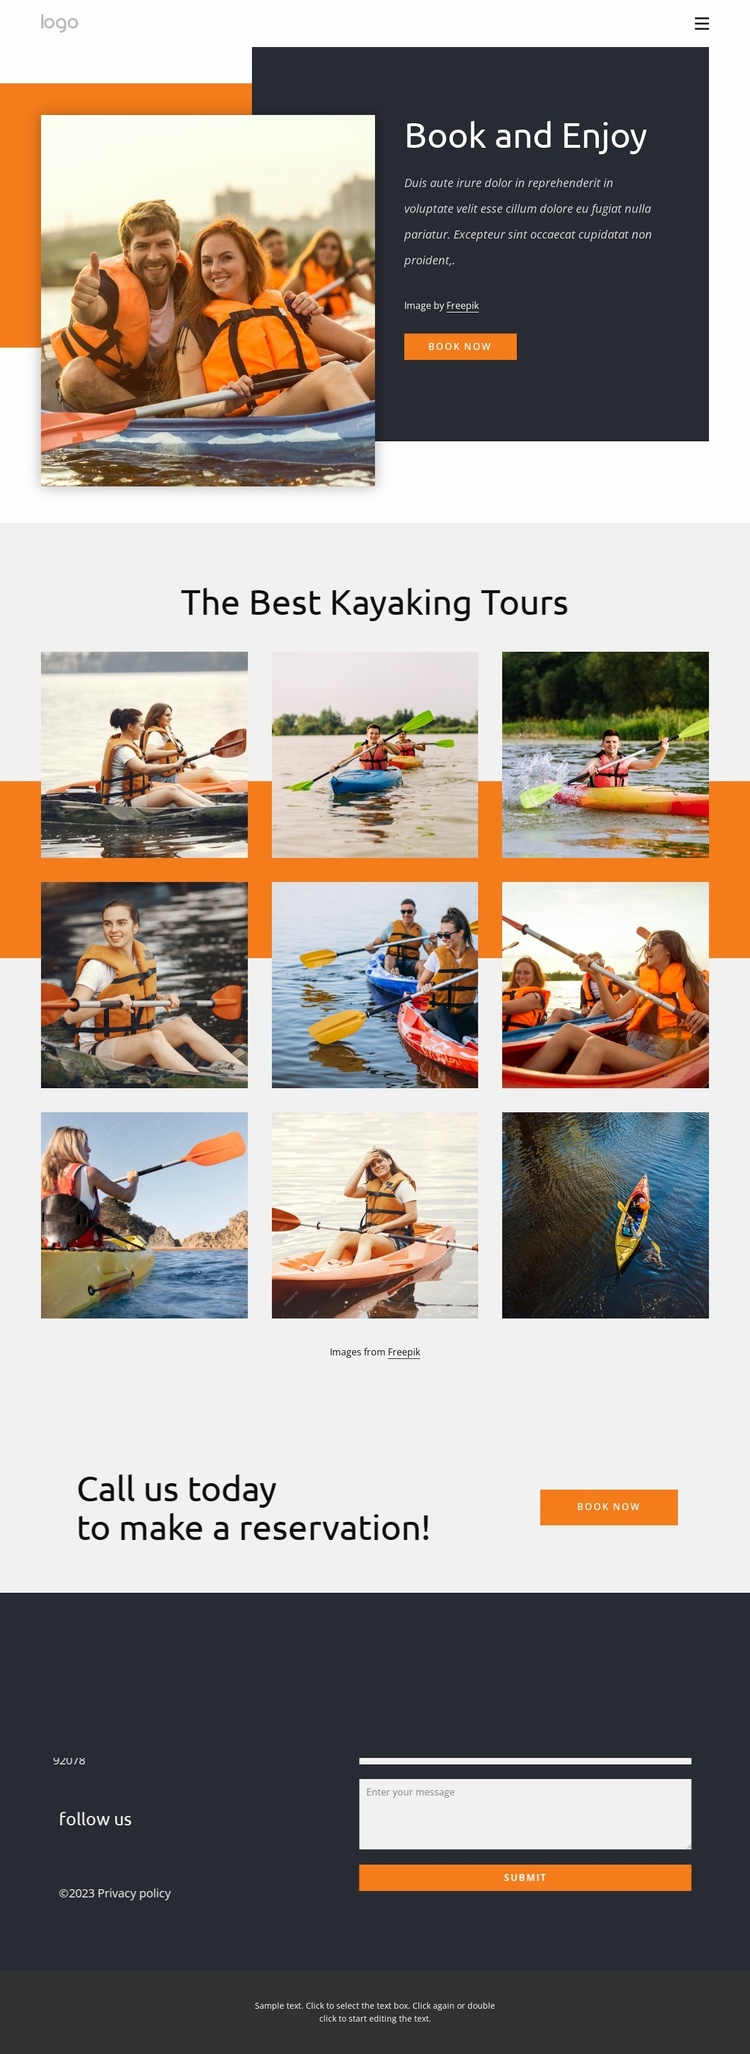 Kayaking tours and holidays Website Template